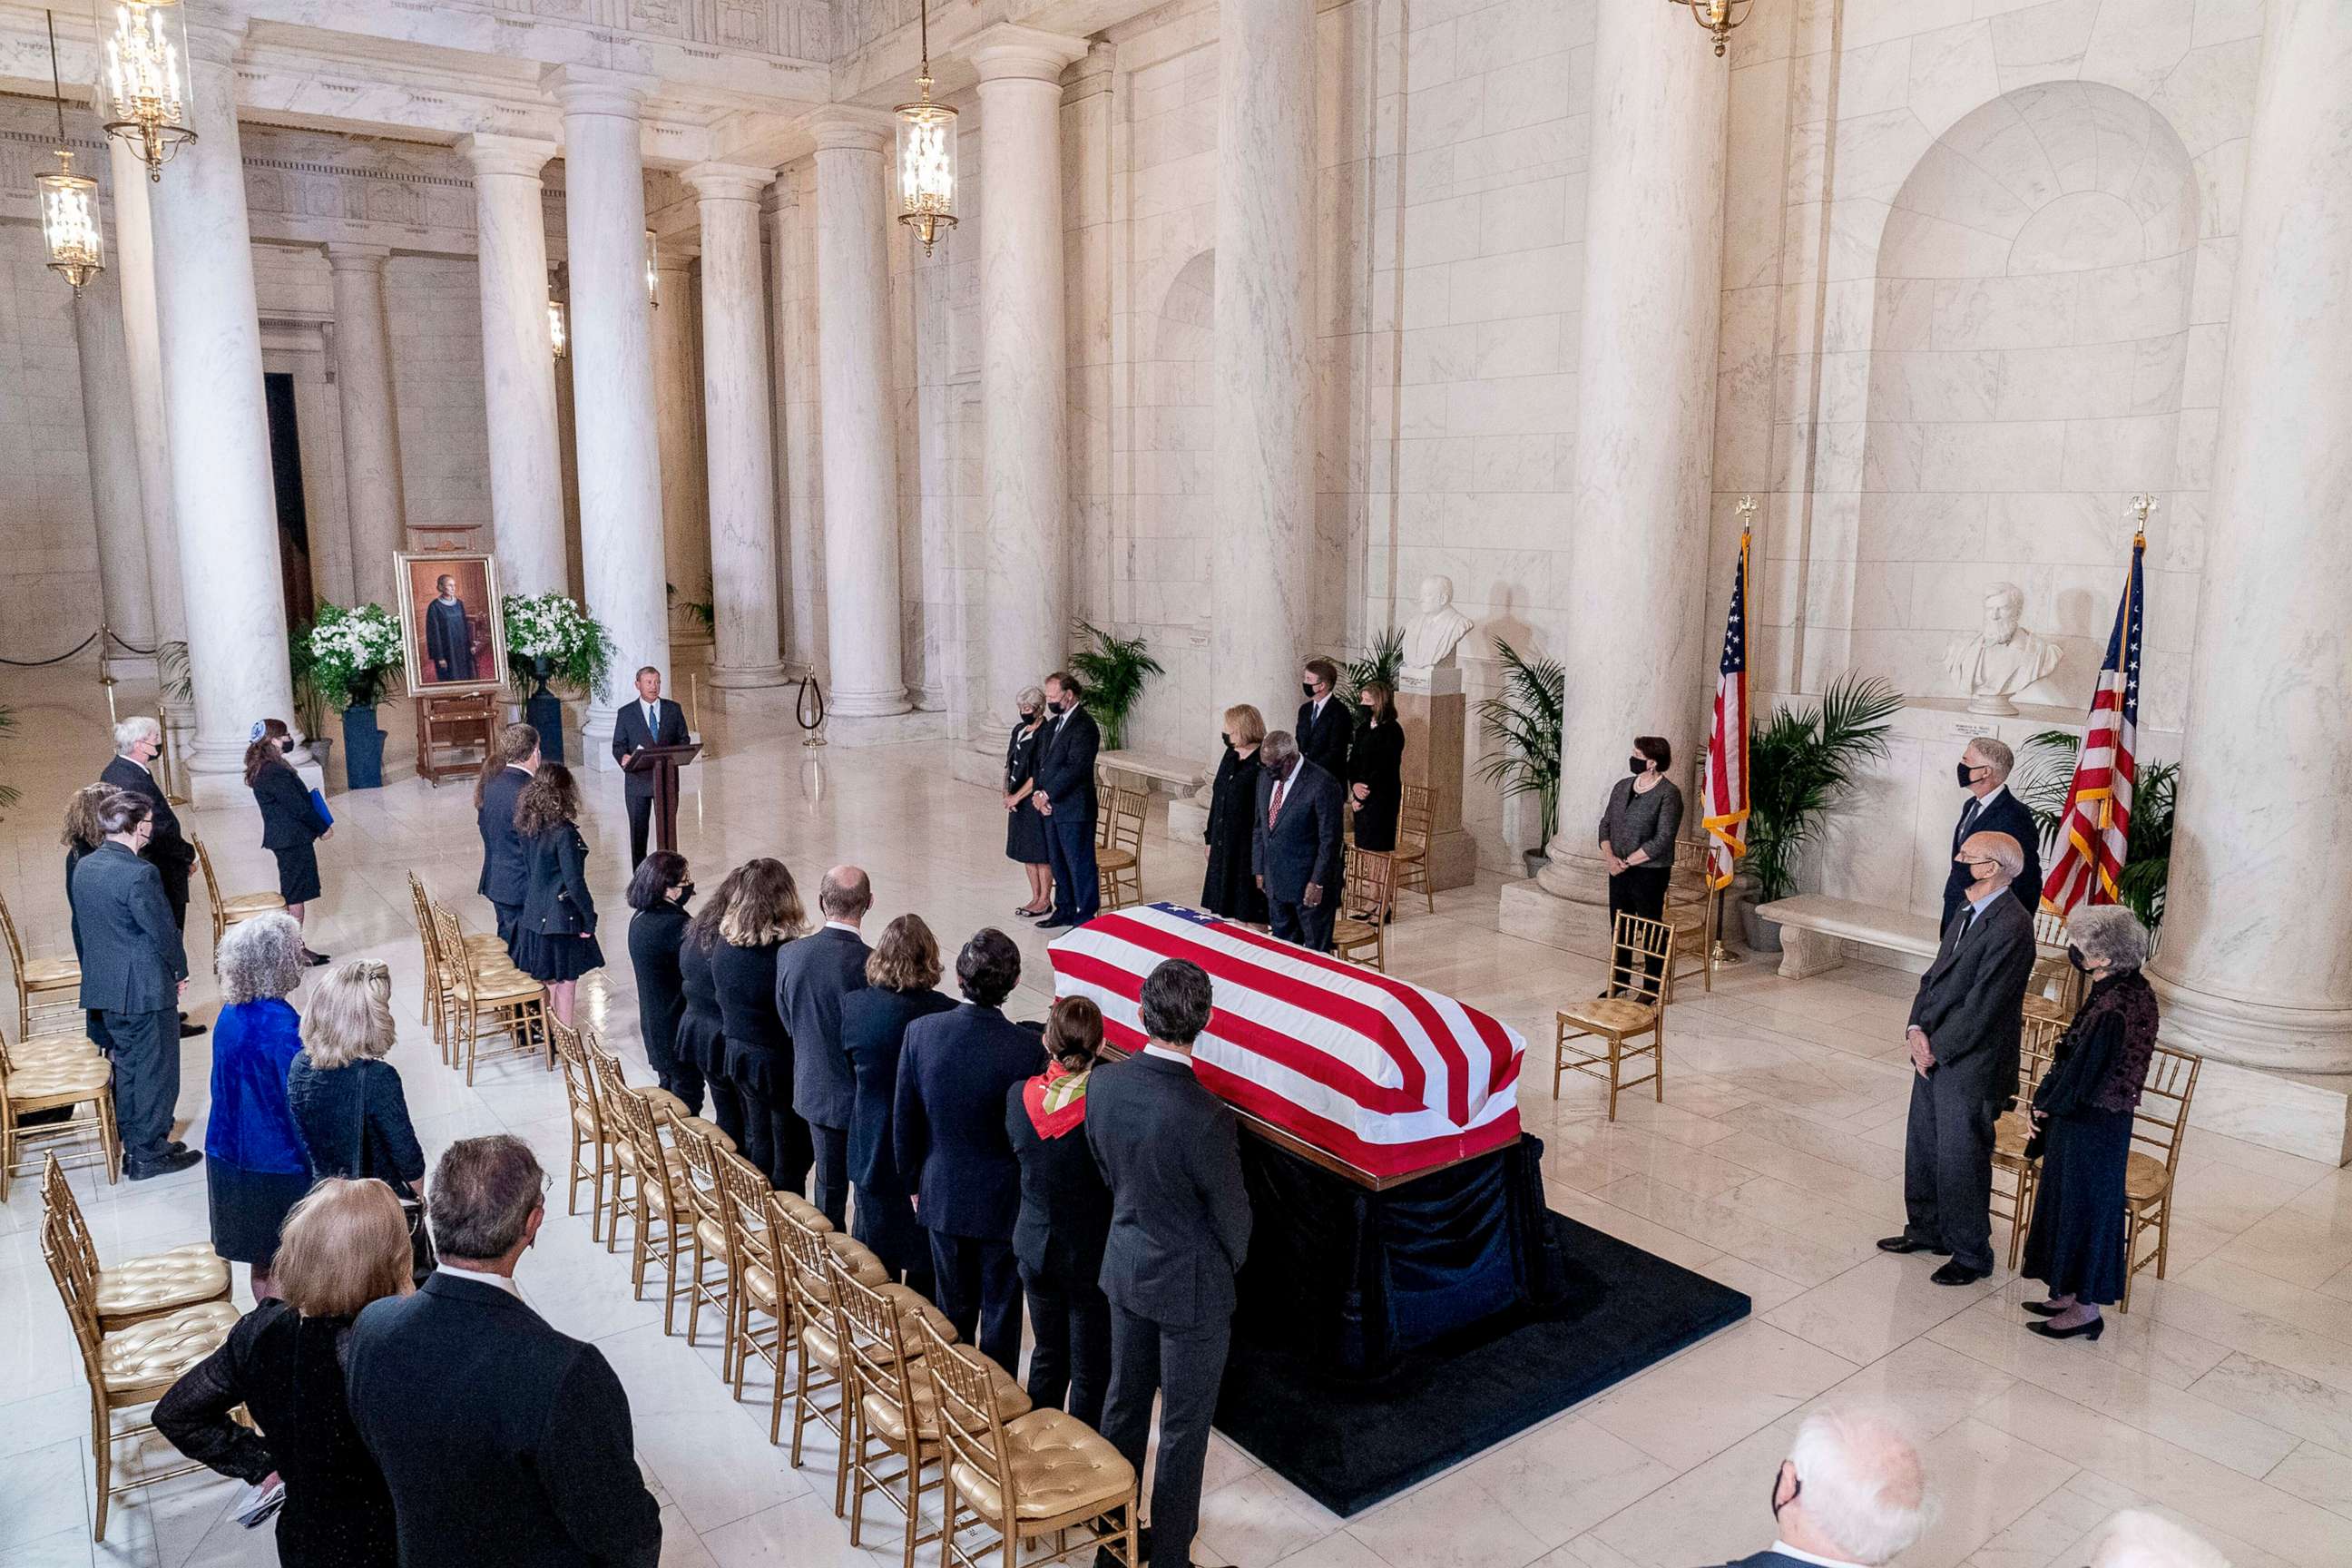 PHOTO: The flag-draped casket of Justice Ruth Bader Ginsburg is visible as Chief Justice of the United States John Roberts speaks during a private ceremony at the Supreme Court in Washington, D.C., Sept. 23, 2020.